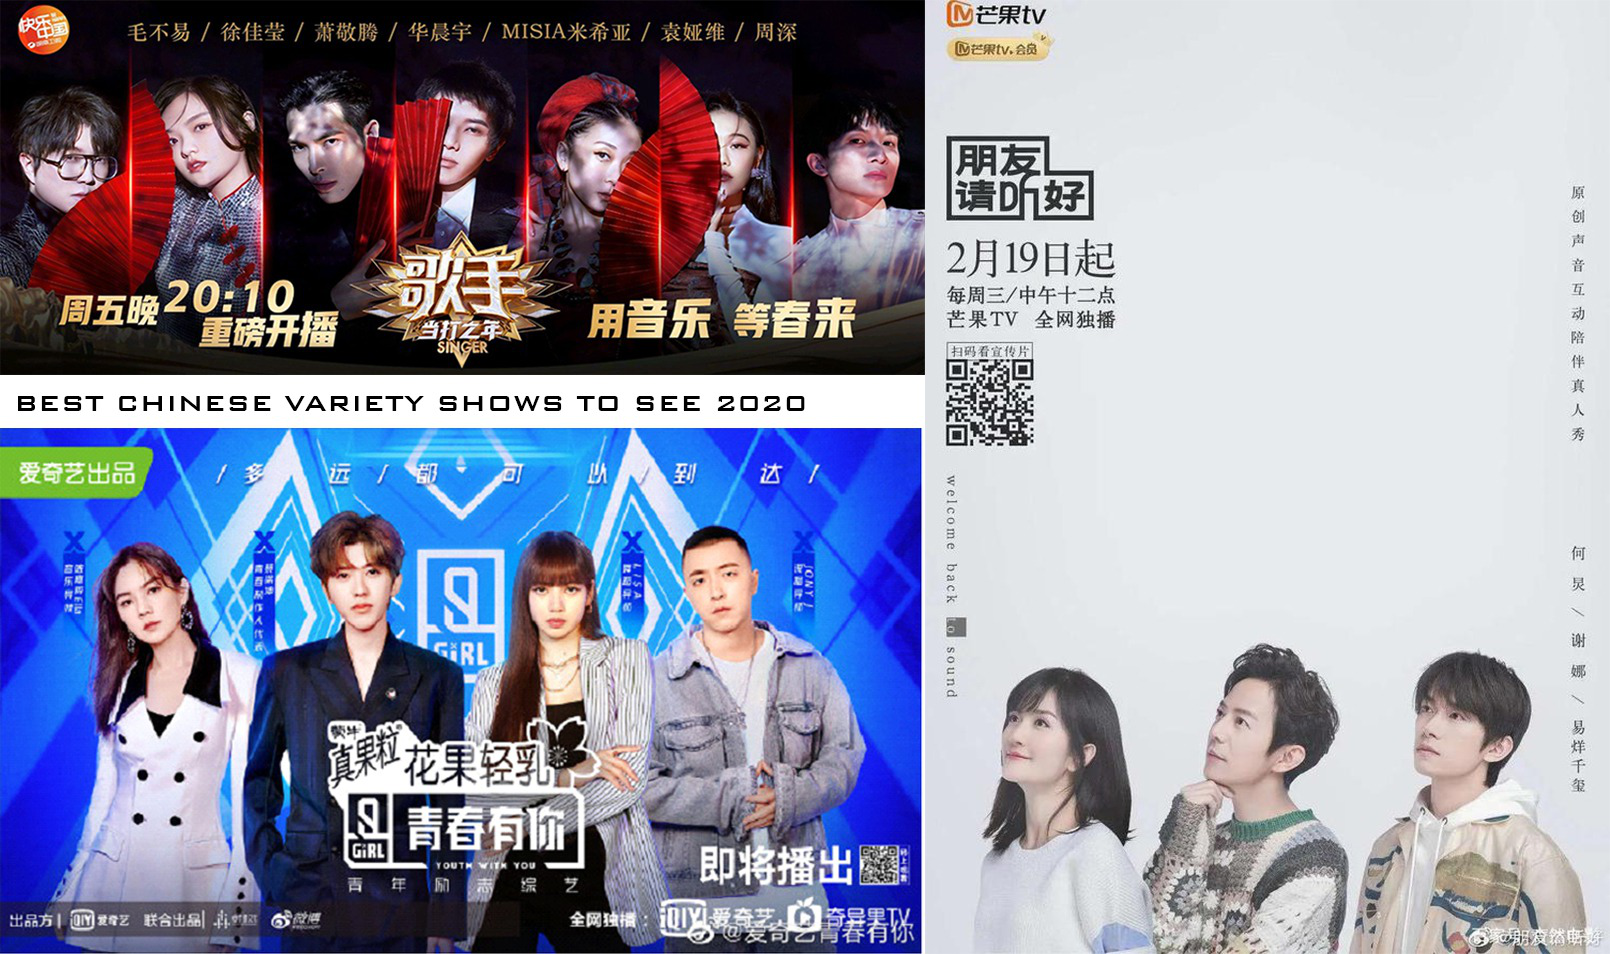 Chinese Variety shows on airing now.